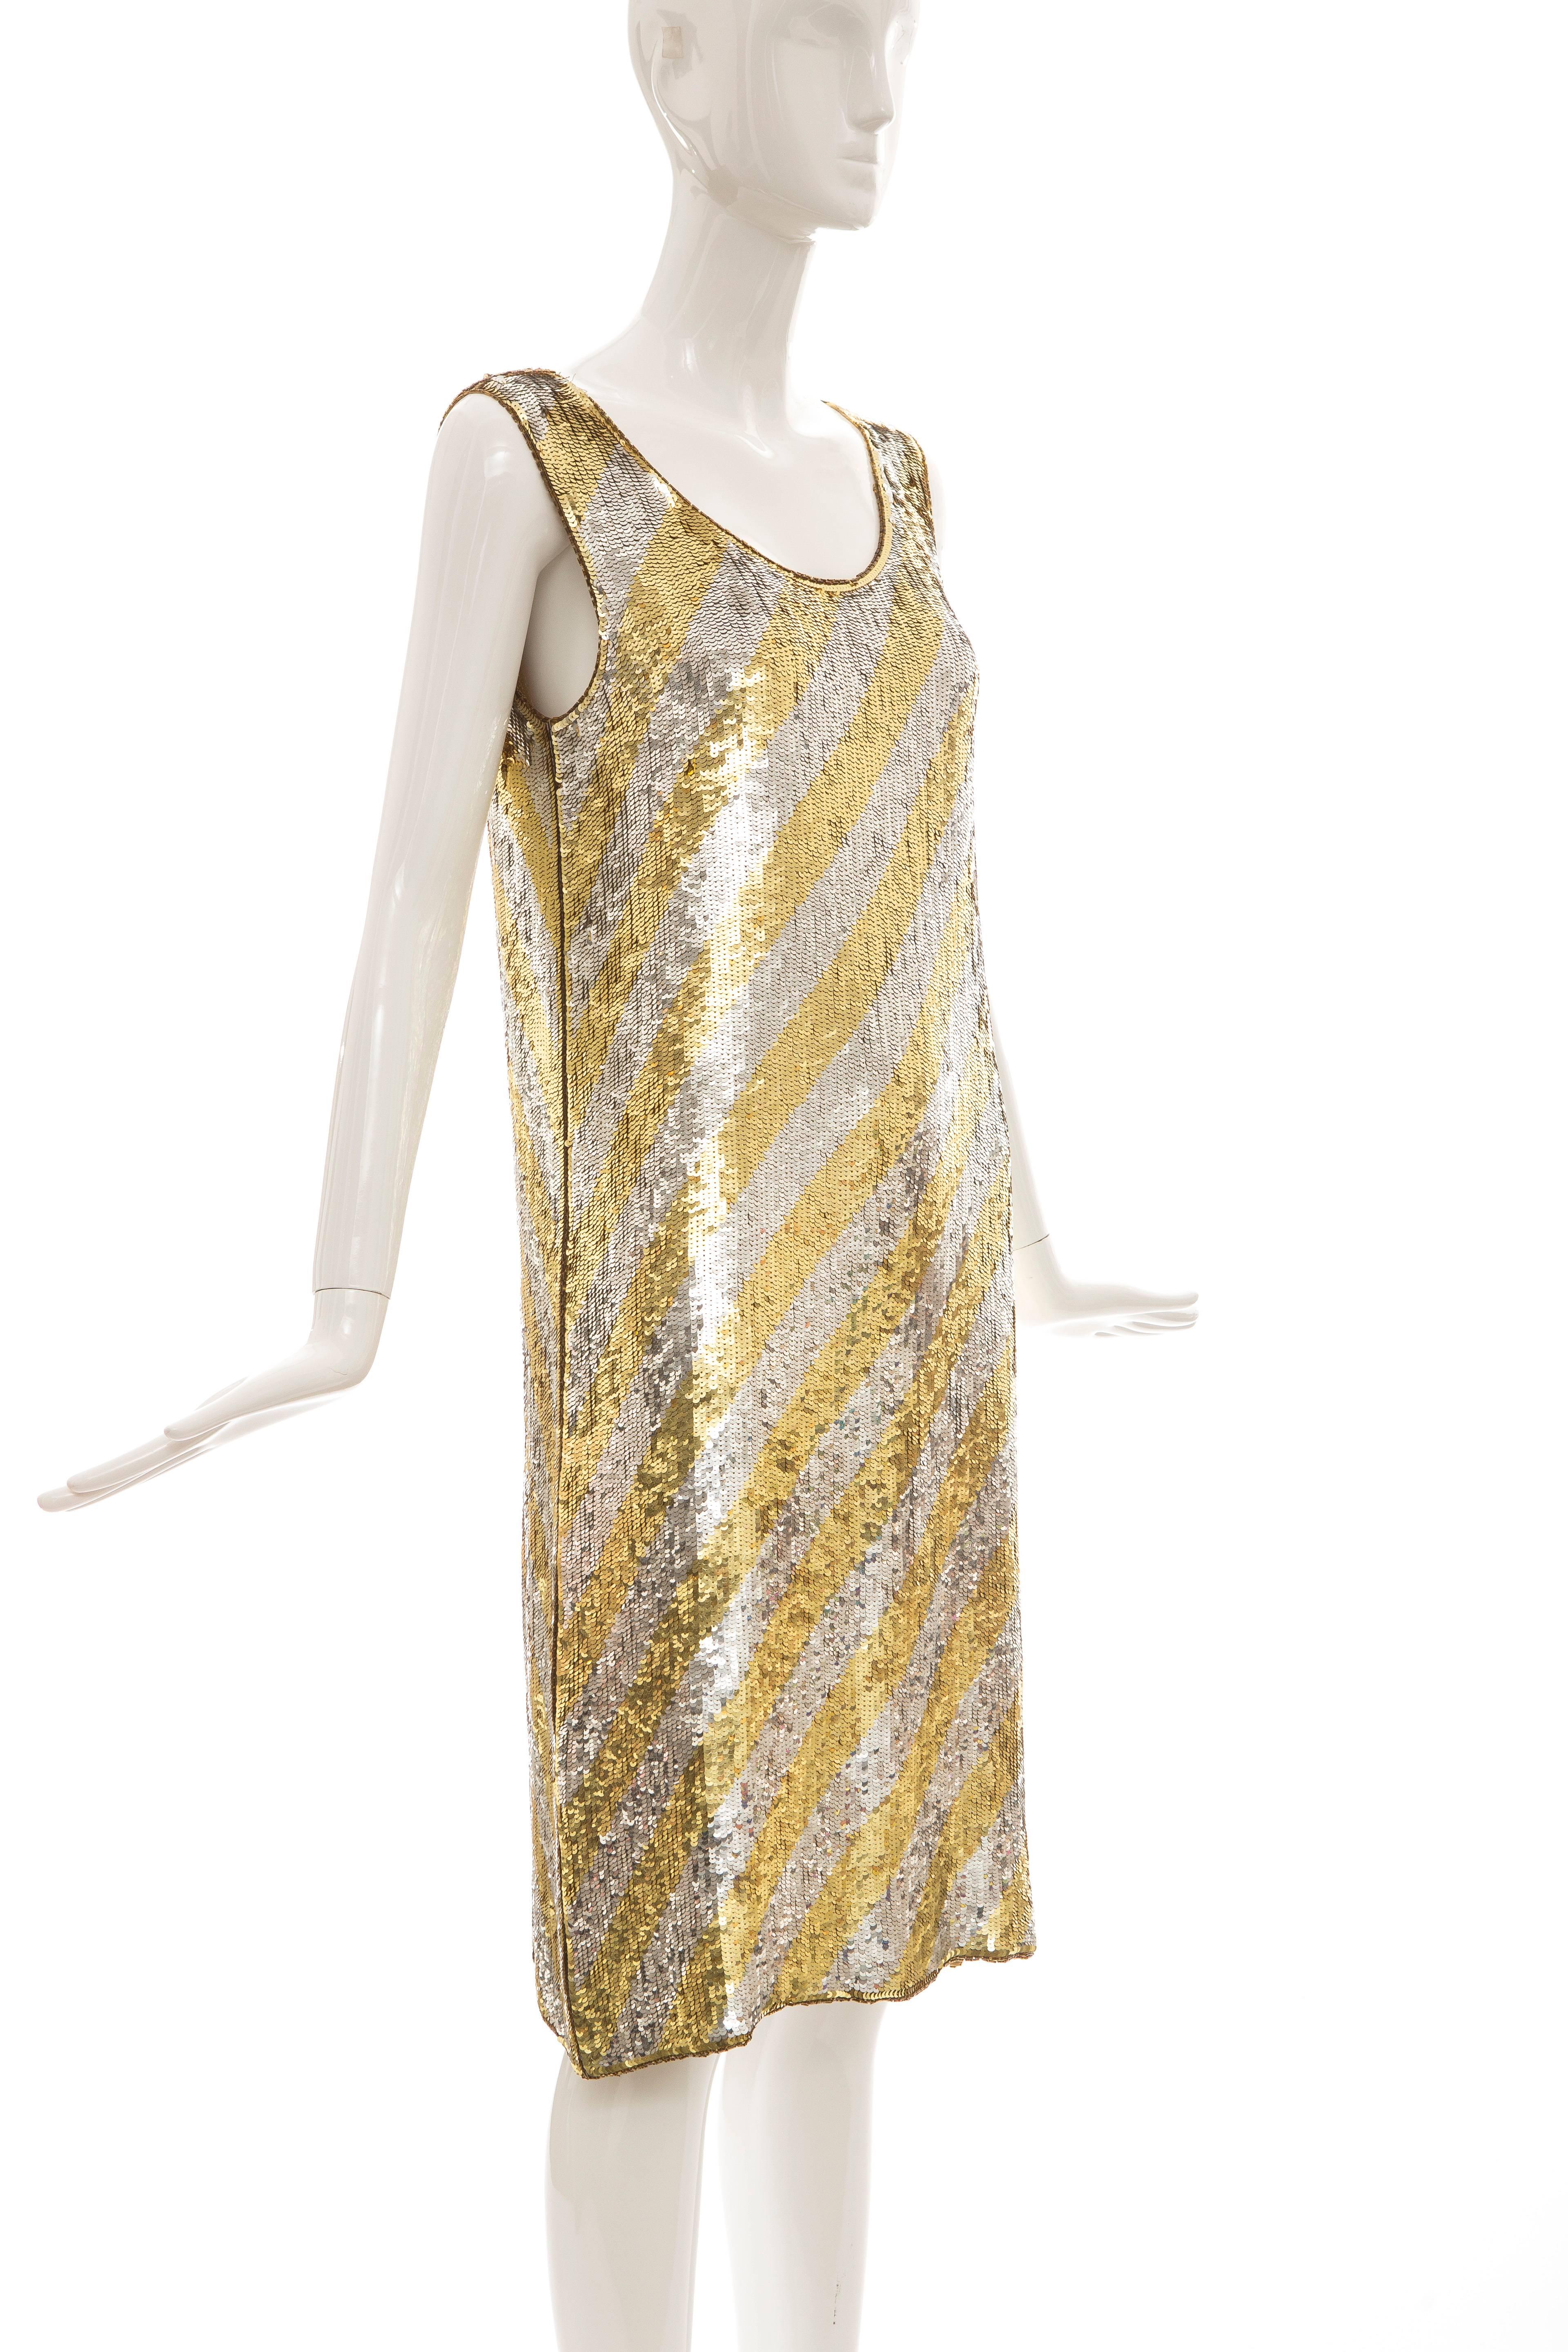  Marc Bohan for Christian Dior Embroidered Sequin Dress, Circa 1970s In Good Condition For Sale In Cincinnati, OH